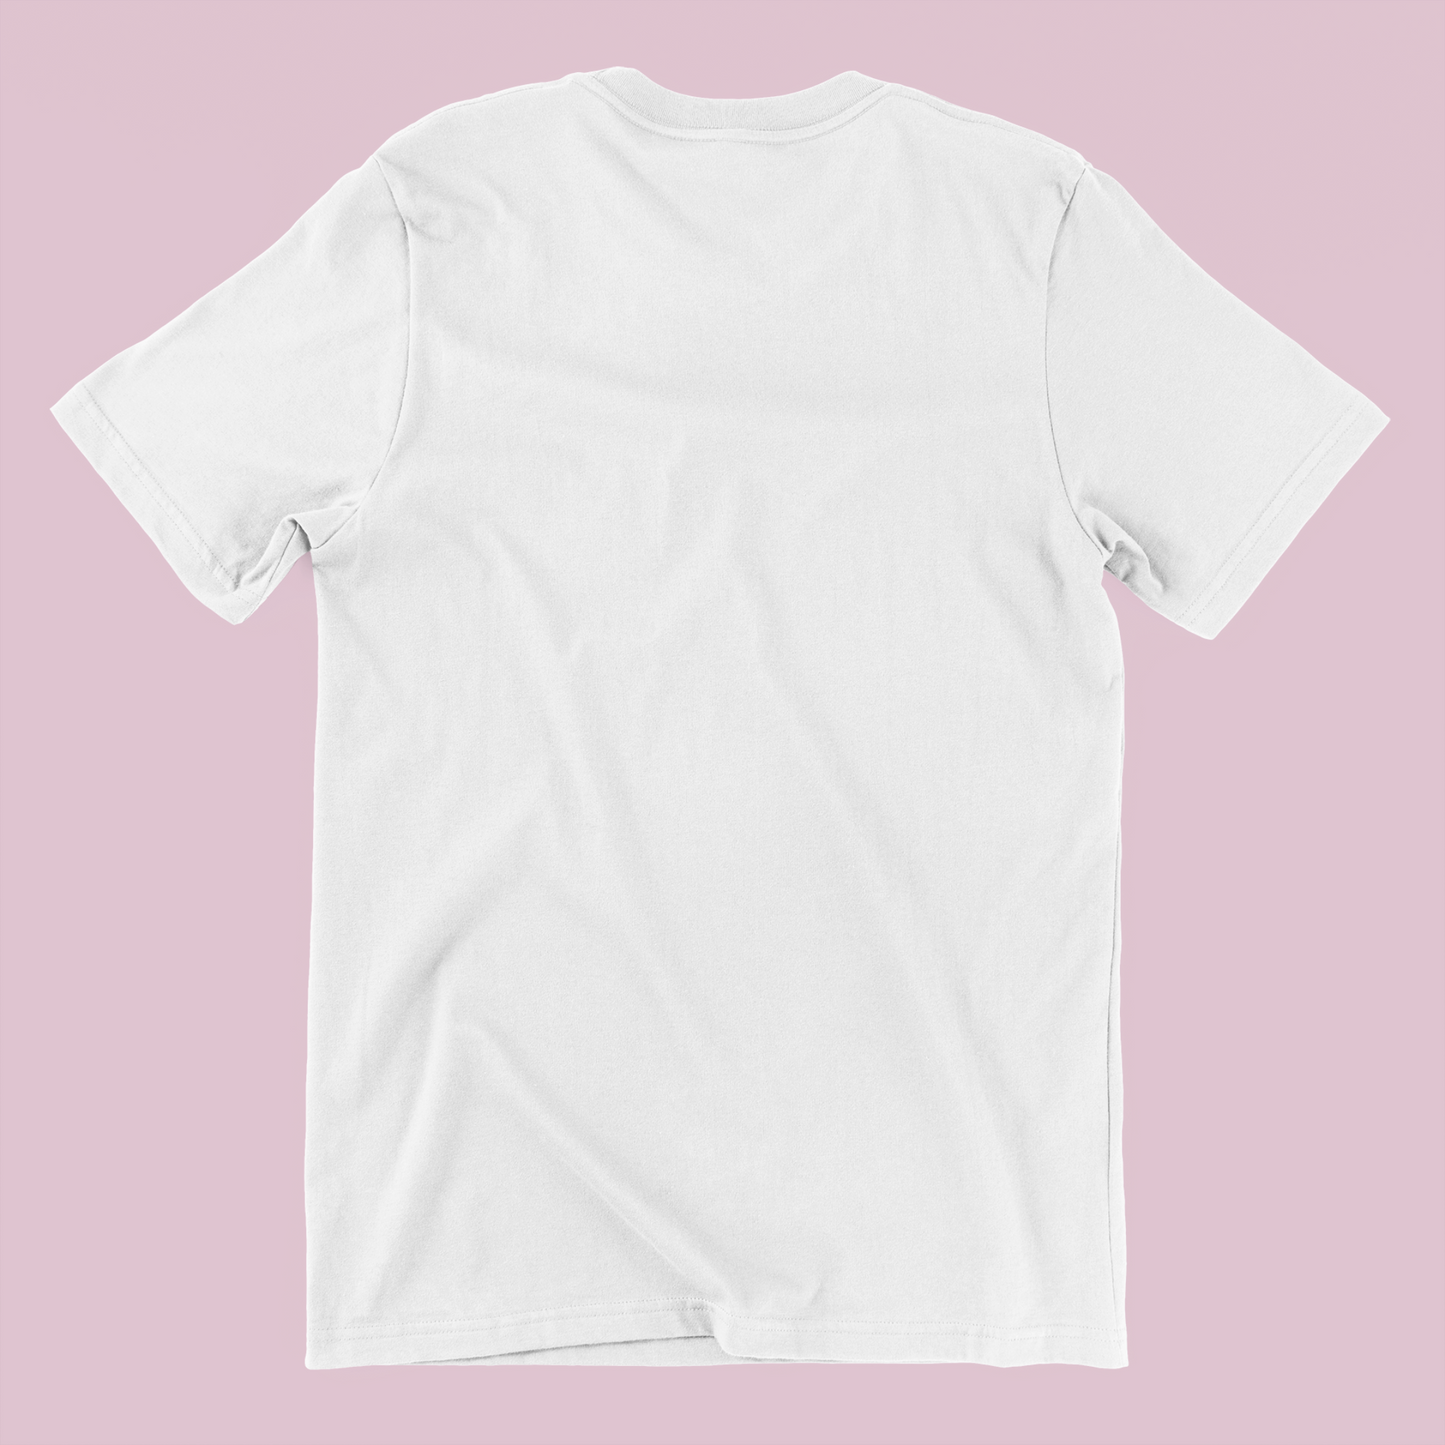 Love Your Planet - White T-shirt